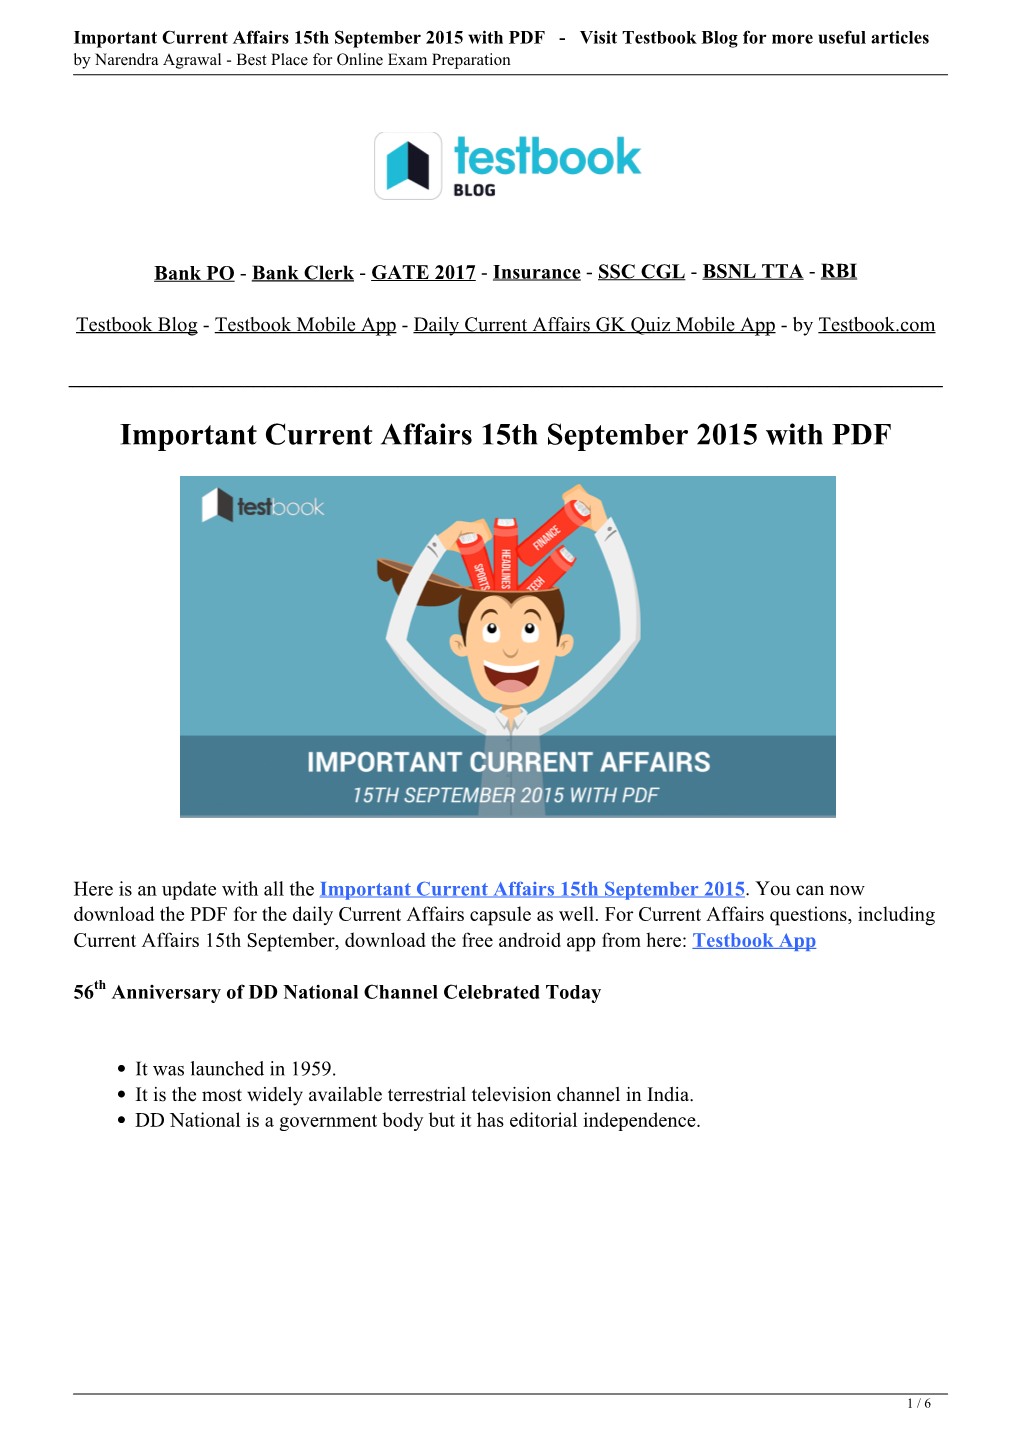 Important Current Affairs 15Th September 2015 with PDF - Visit Testbook Blog for More Useful Articles by Narendra Agrawal - Best Place for Online Exam Preparation